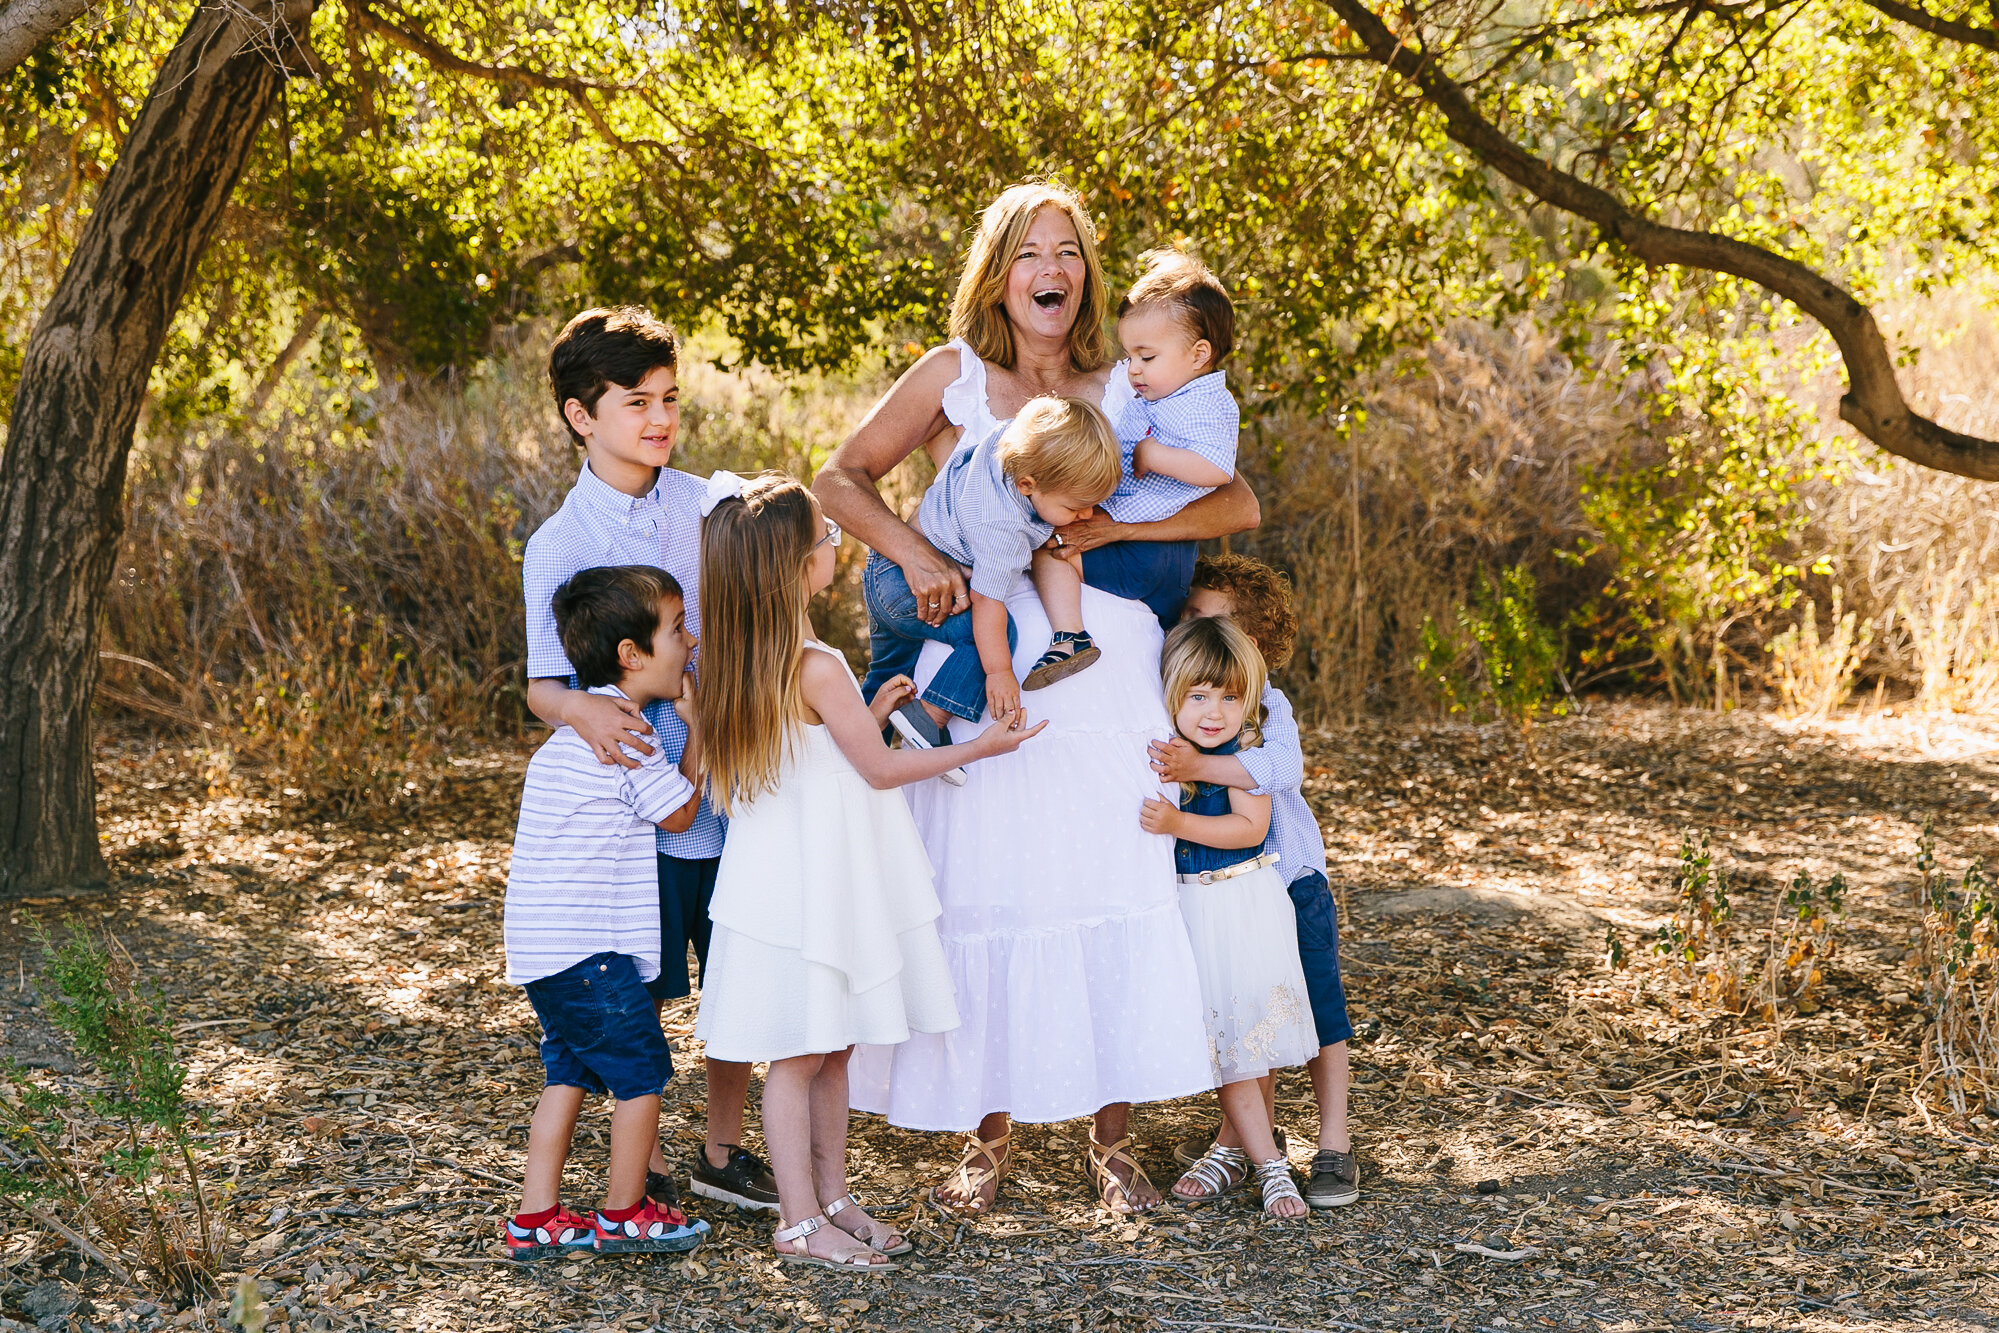 Los_Angeles_Family_Photography_Orange_County_Children_Babies_Field_Farm_Outdoors_Morning_Session_California_Girls_Boys_Kids_Photography-0636.jpg